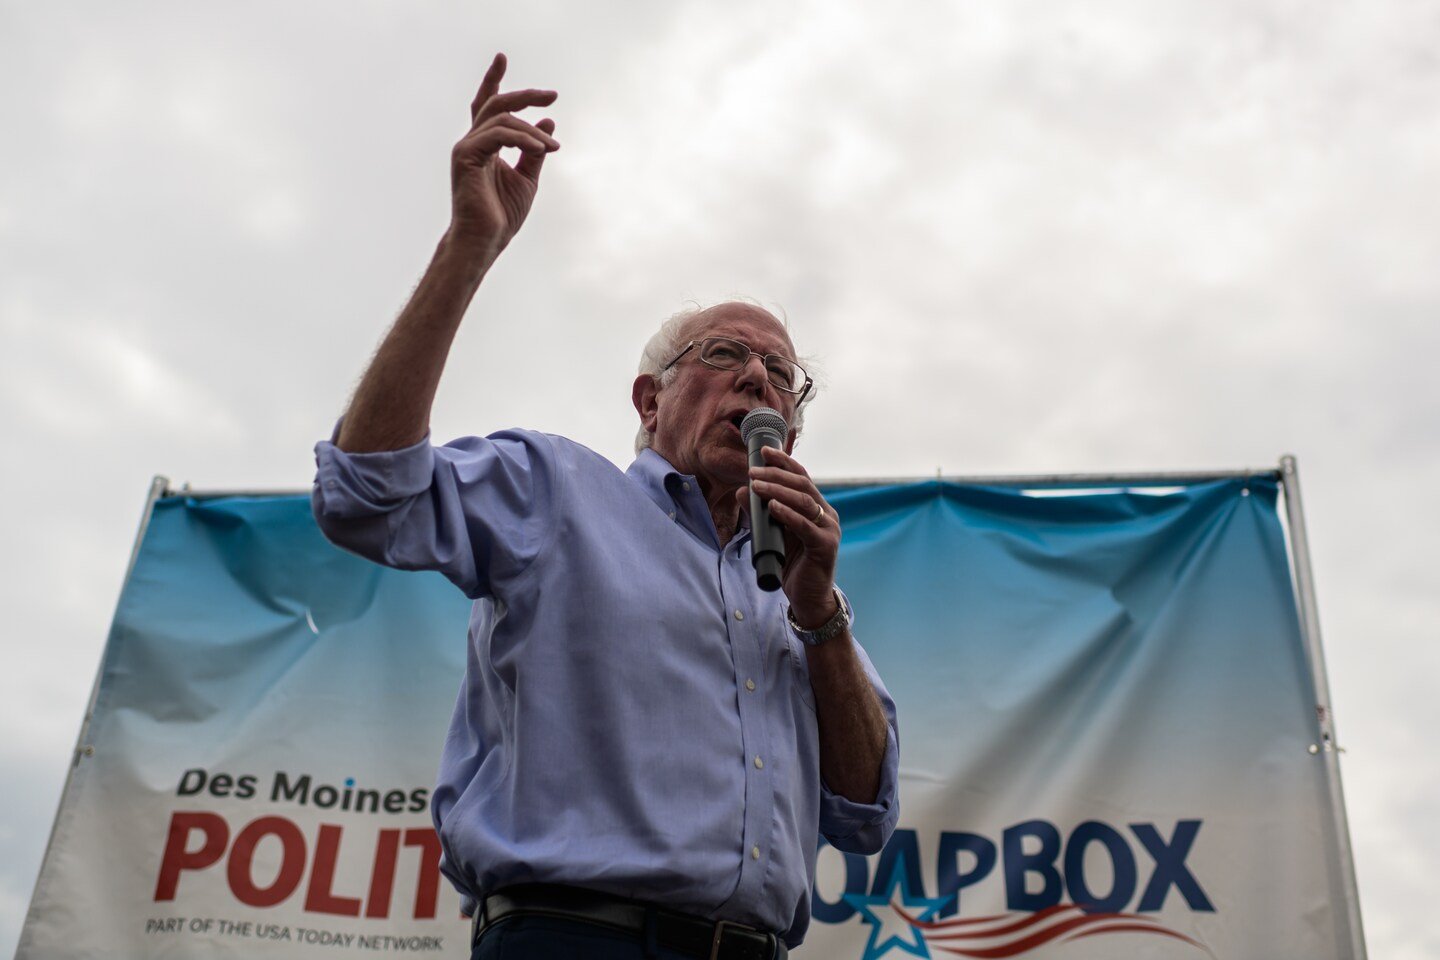 Bernie Sanders focuses on Medicare-for-all, making it the defining issue of his campaign